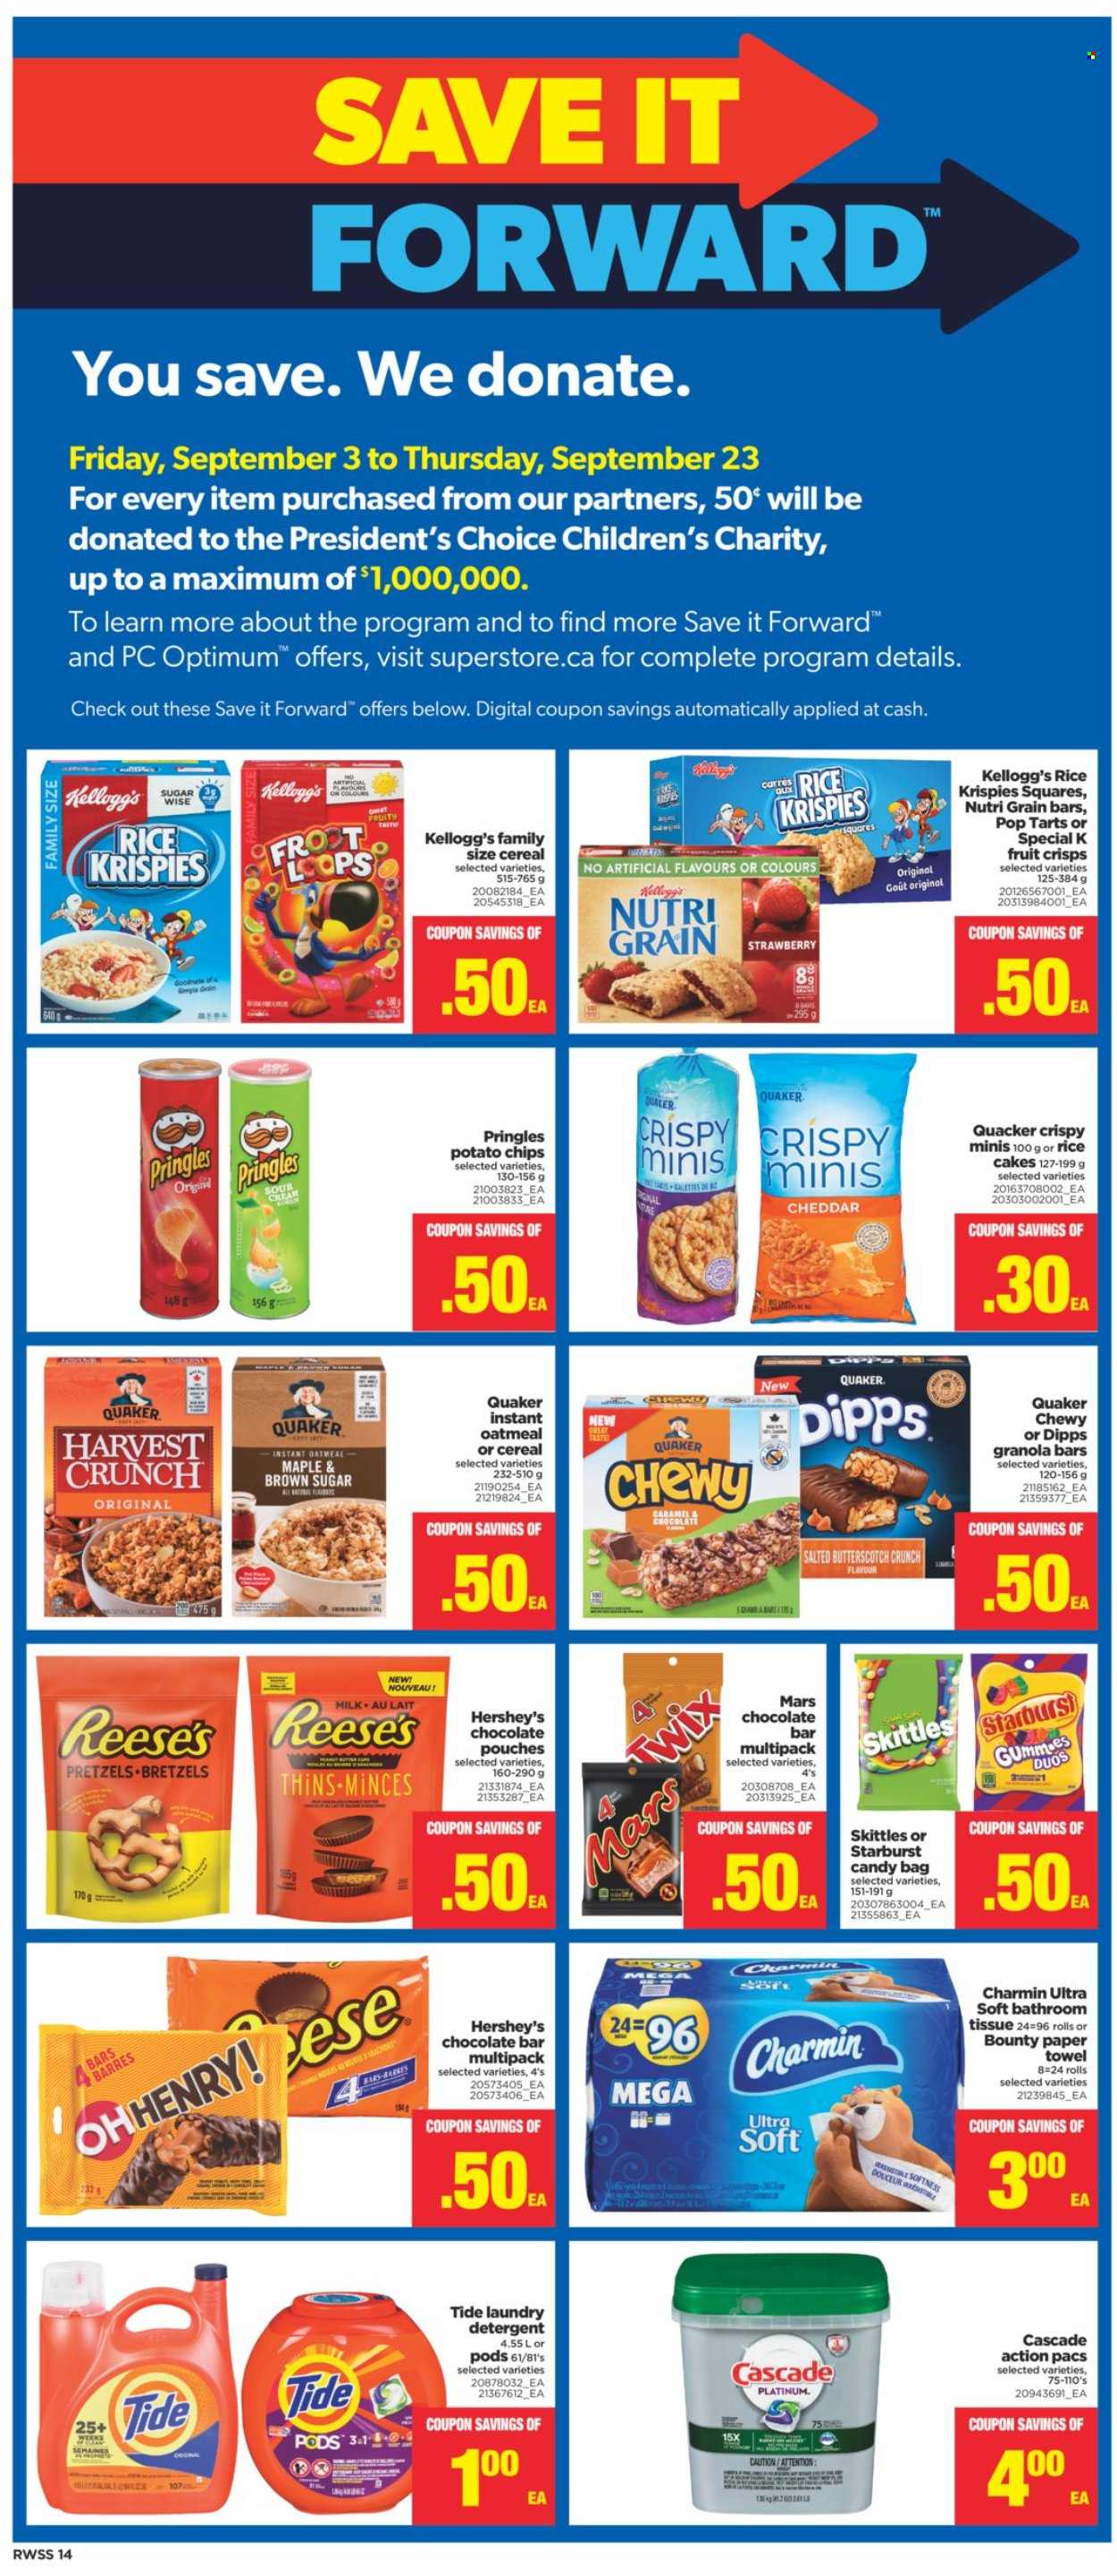 thumbnail - Real Canadian Superstore Flyer - September 10, 2021 - September 16, 2021 - Sales products - pretzels, Quaker, cheese, Président, milk, Reese's, Hershey's, butterscotch, Bounty, Mars, Kellogg's, Skittles, Pop-Tarts, Starburst, chocolate bar, potato chips, Pringles, Thins, oatmeal, granola bar, Rice Krispies, Nutri-Grain, caramel, L'Or, bath tissue, paper towels, Charmin, Tide, laundry detergent, Cascade, Optimum, detergent, chips. Page 14.